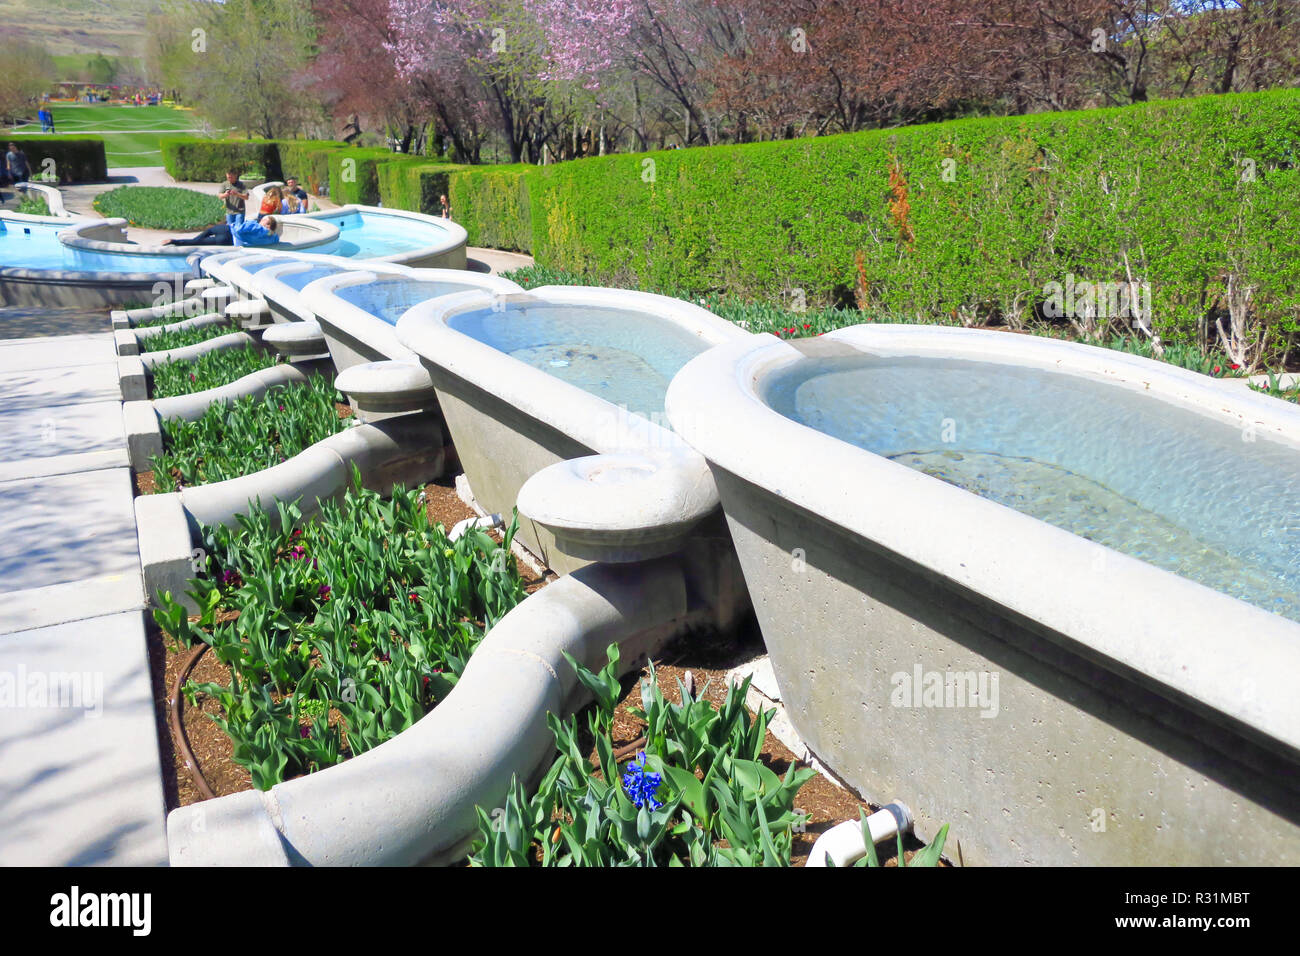 A row of decorative conrete baths flowing water down from an elevated position. Stock Photo